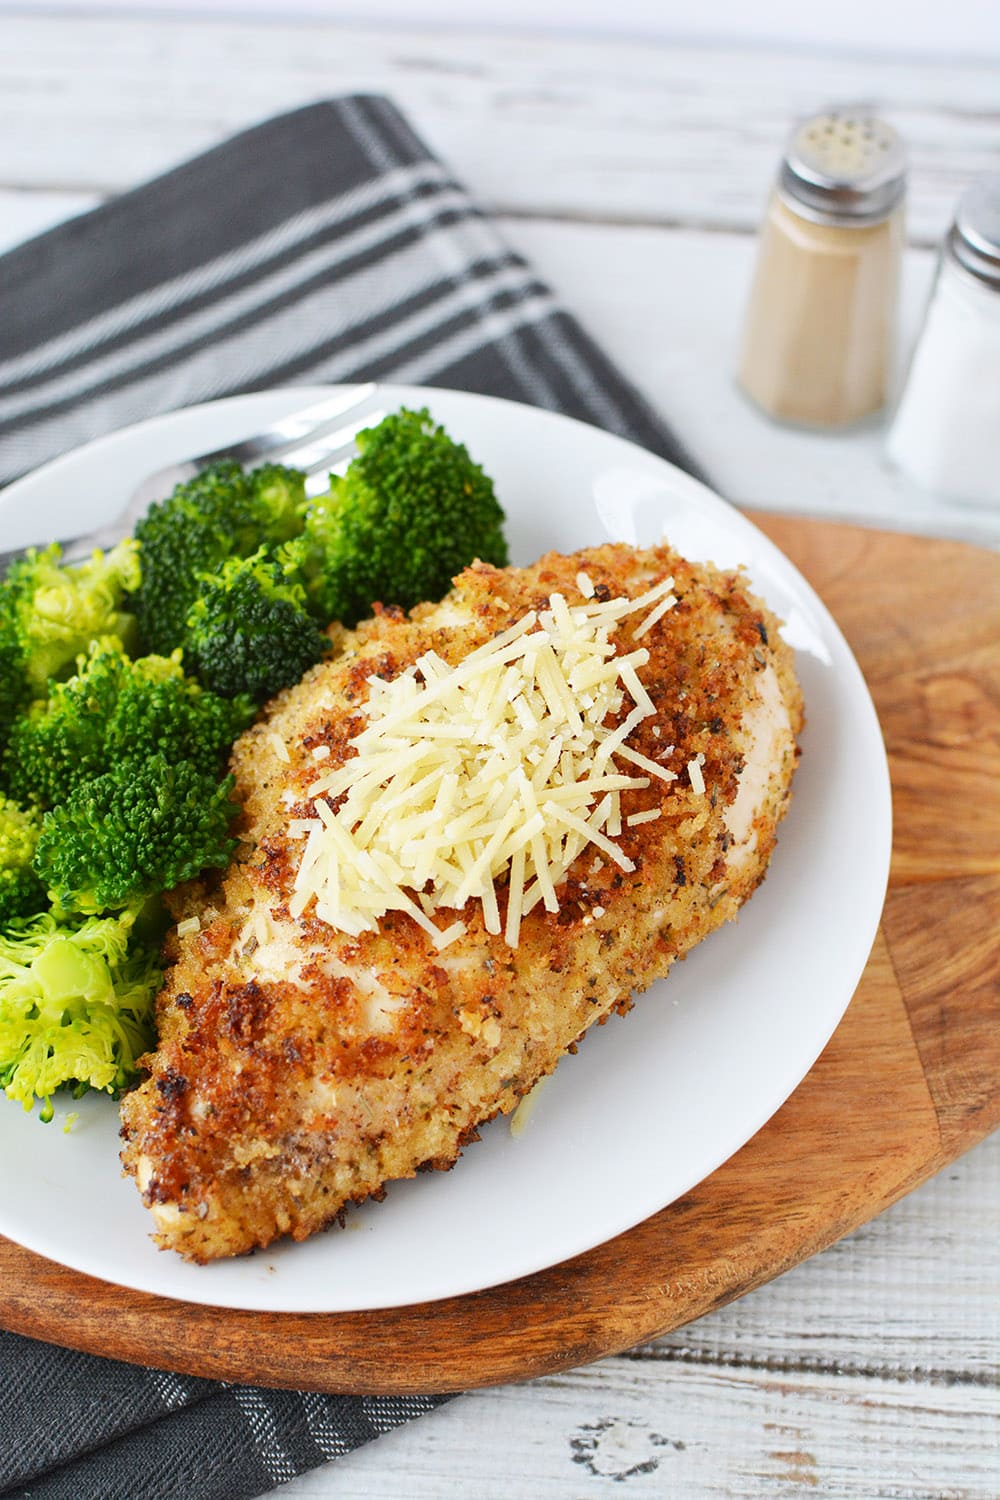 Herb crusted chicken and broccoli dinner on a plate.